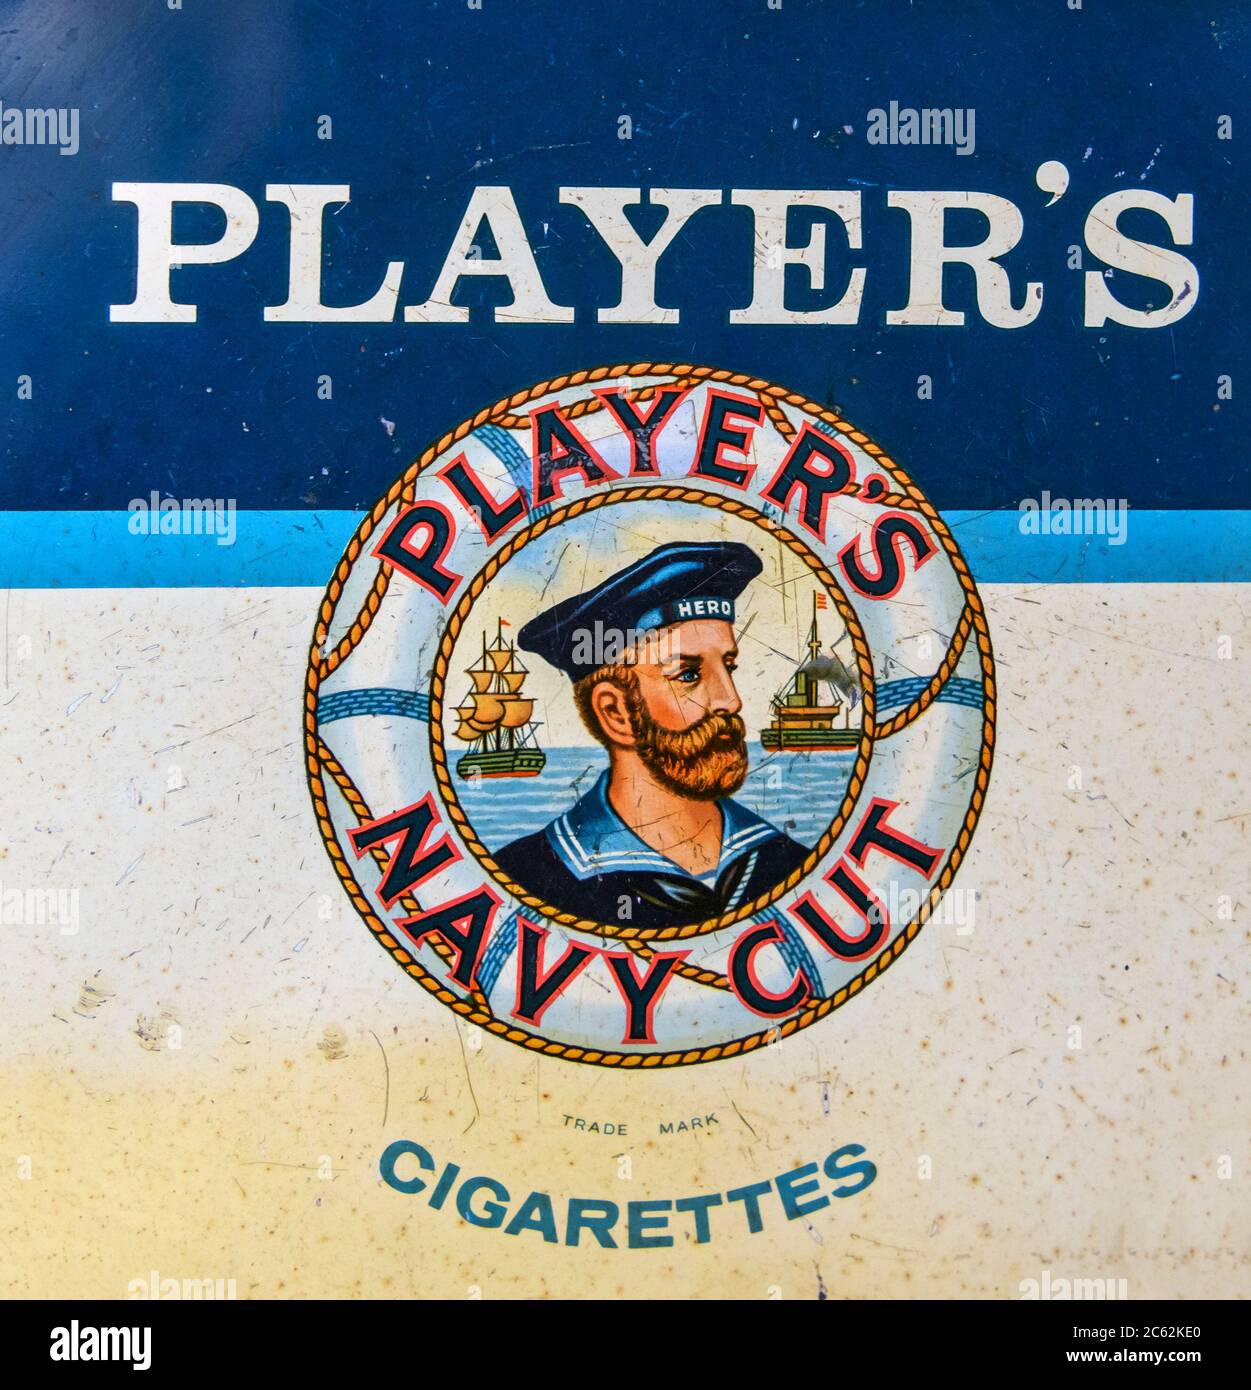 Player's Navy Cut cigarette advertisement on an old tray Stock Photo